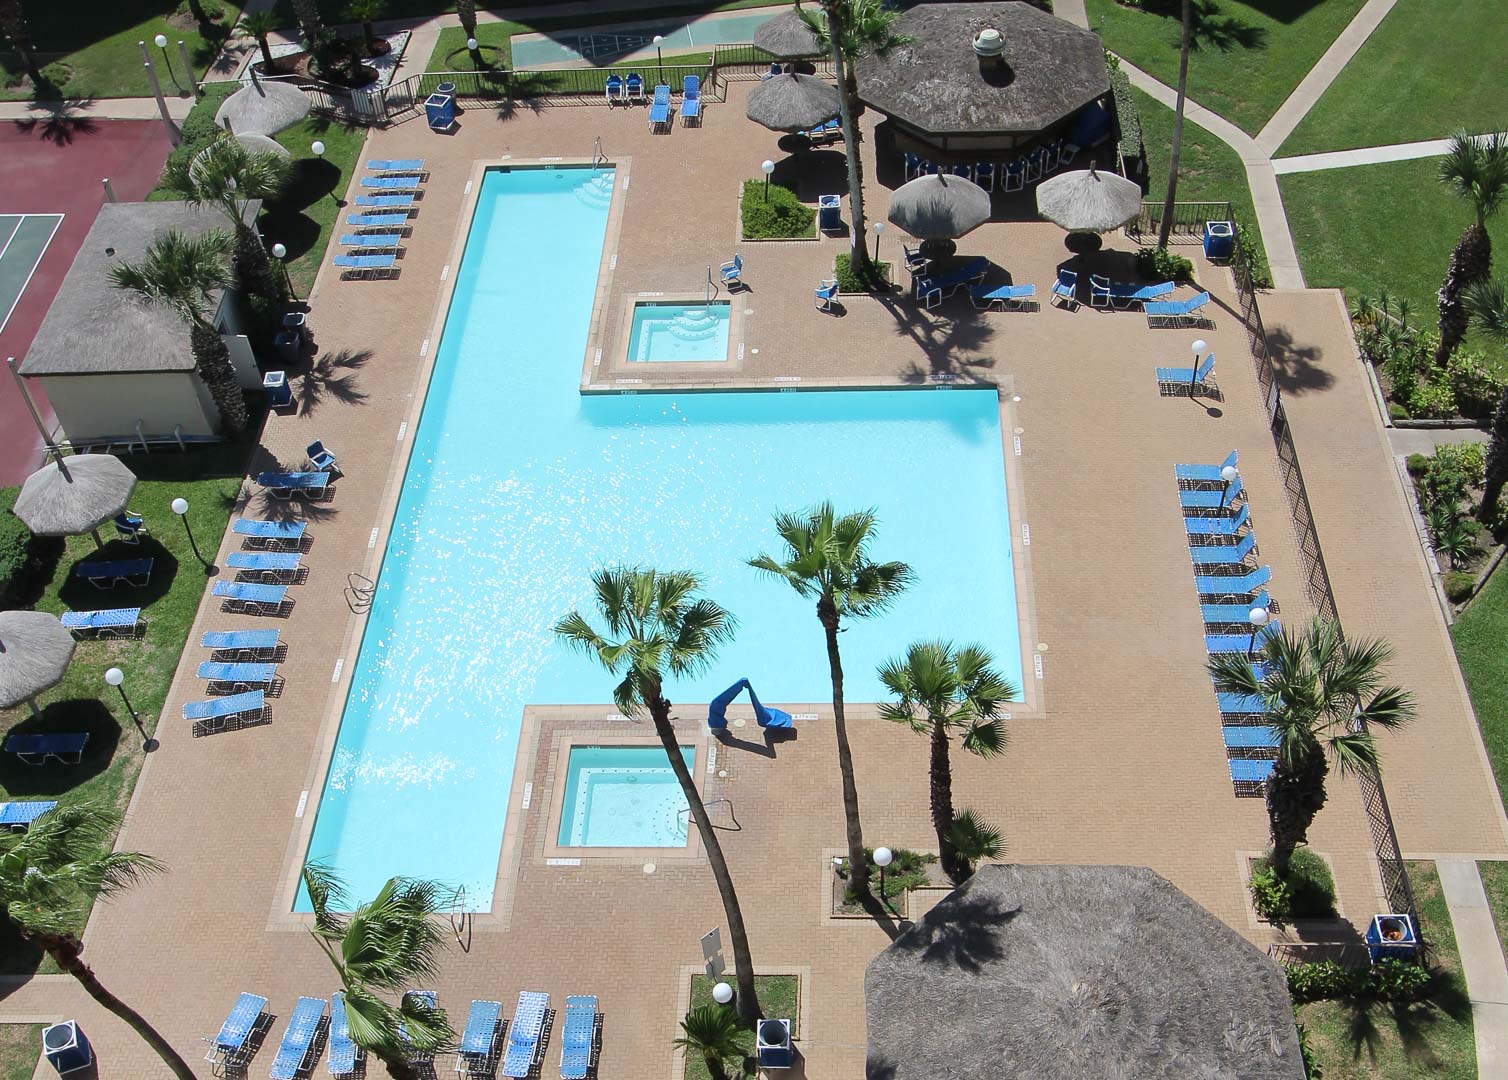 An outdoor swimming pool at VRI's Royale Beach and Tennis Club.